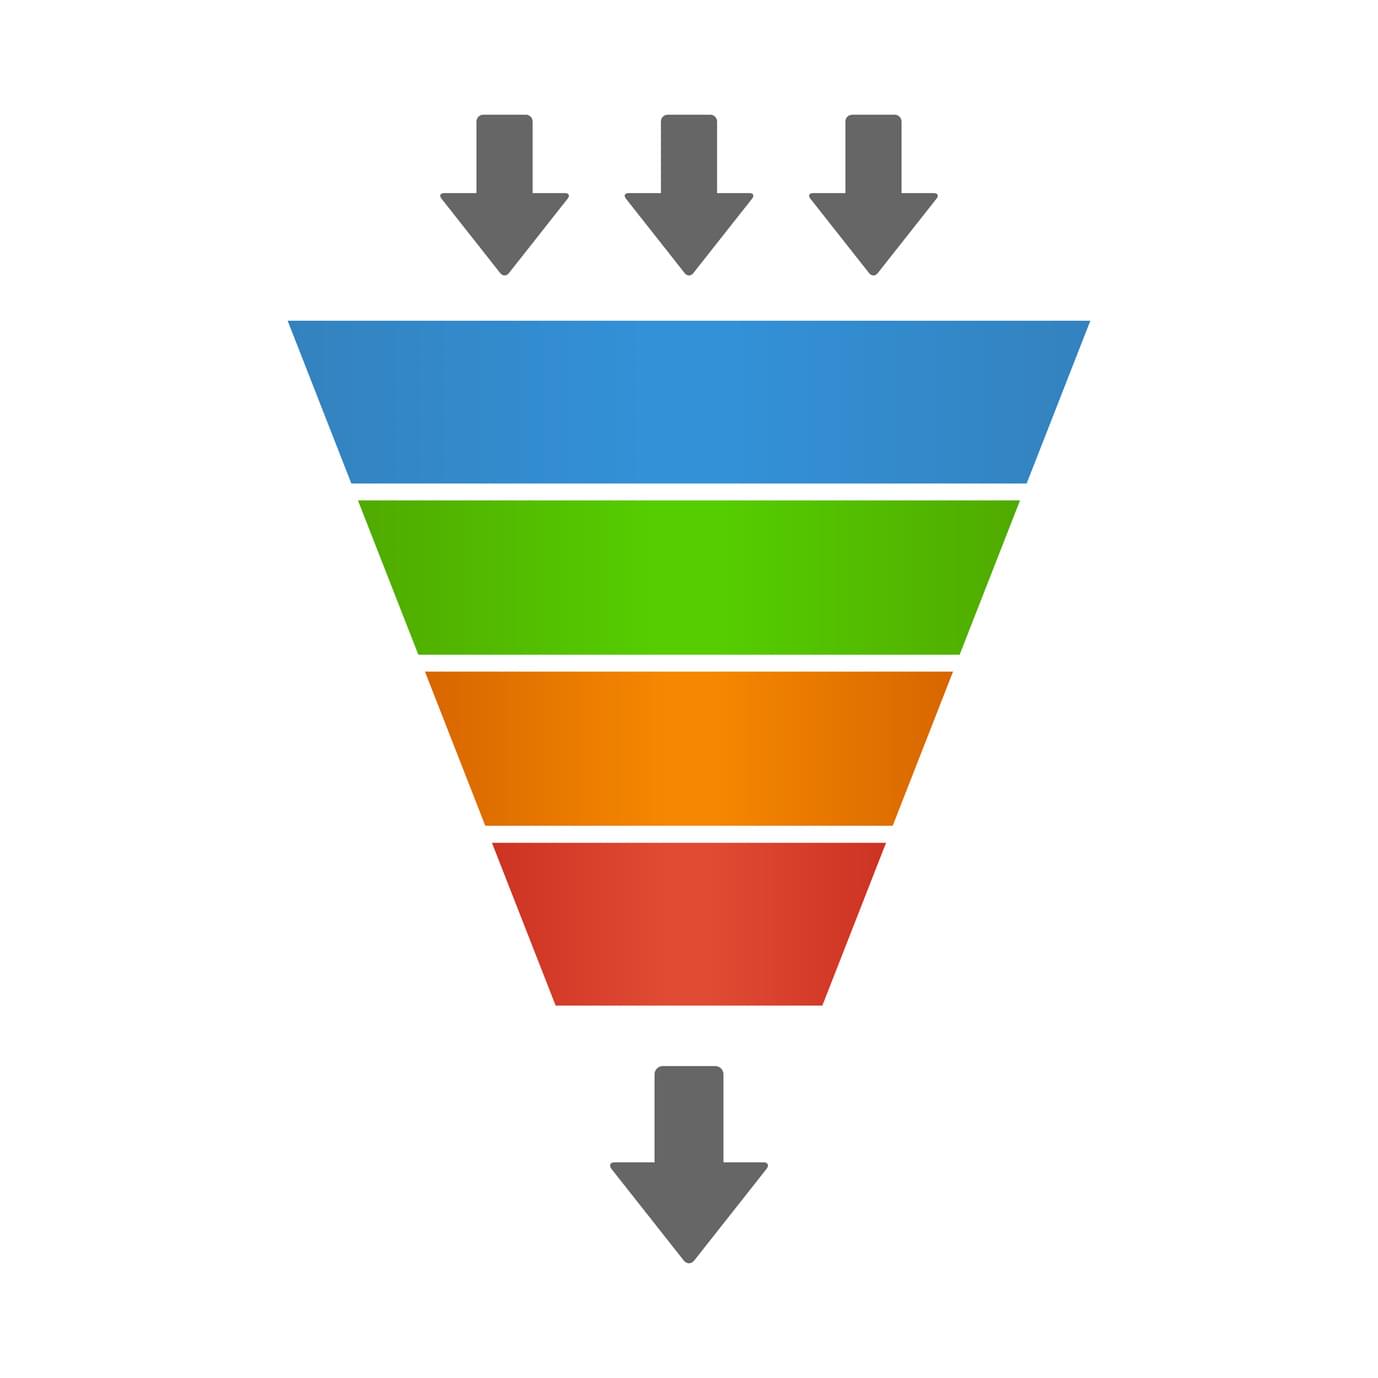 B2B nurture campaign for your sales funnel